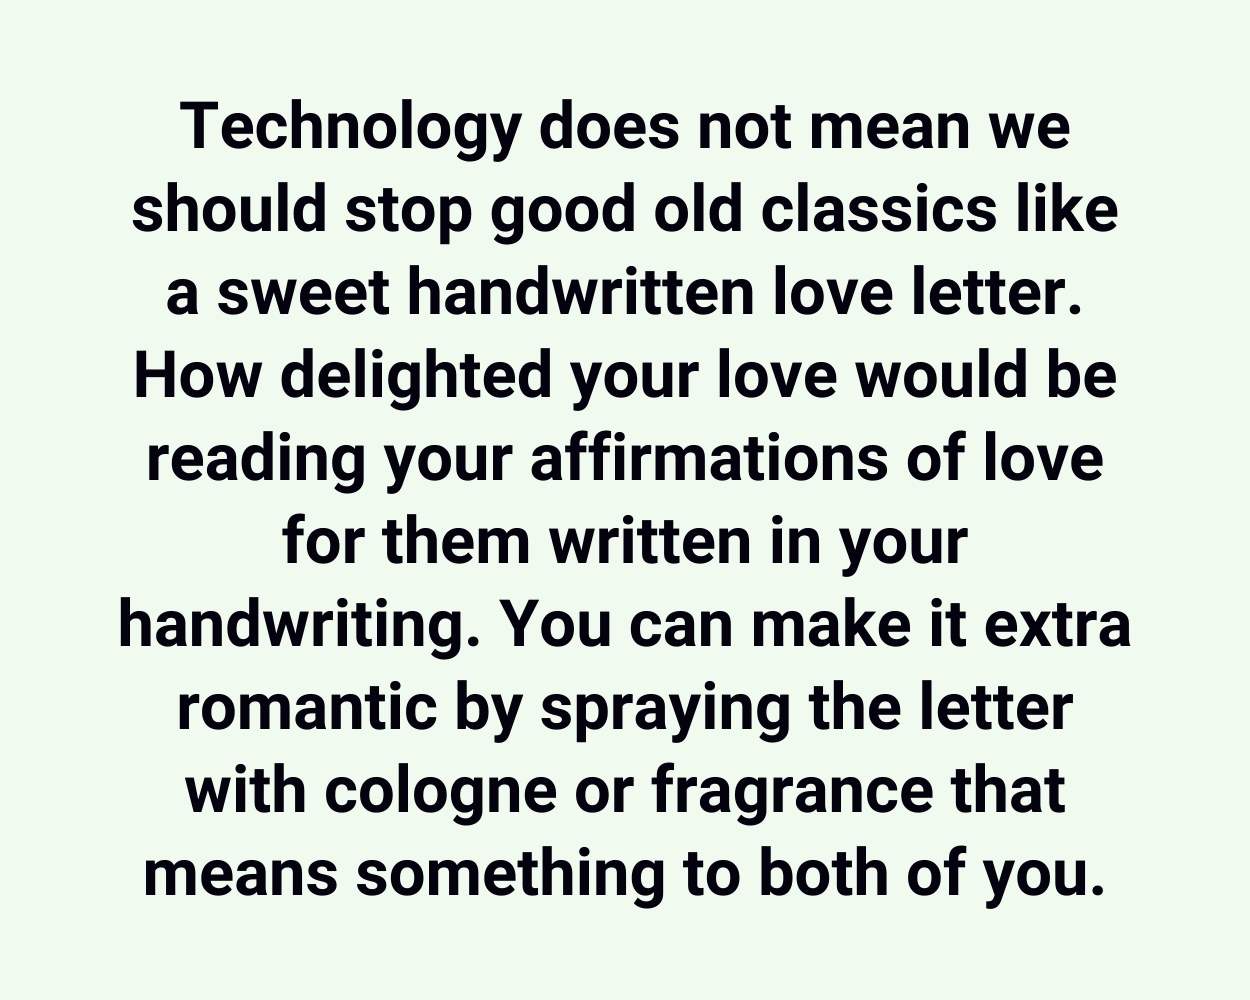 Technology does not mean we should stop good old classics like a sweet handwritten love letter. How delighted your love would be reading your affirmations of love for them written in your handwriting. You can make it extra romantic by spraying the letter with cologne or fragrance that means something to both of you.